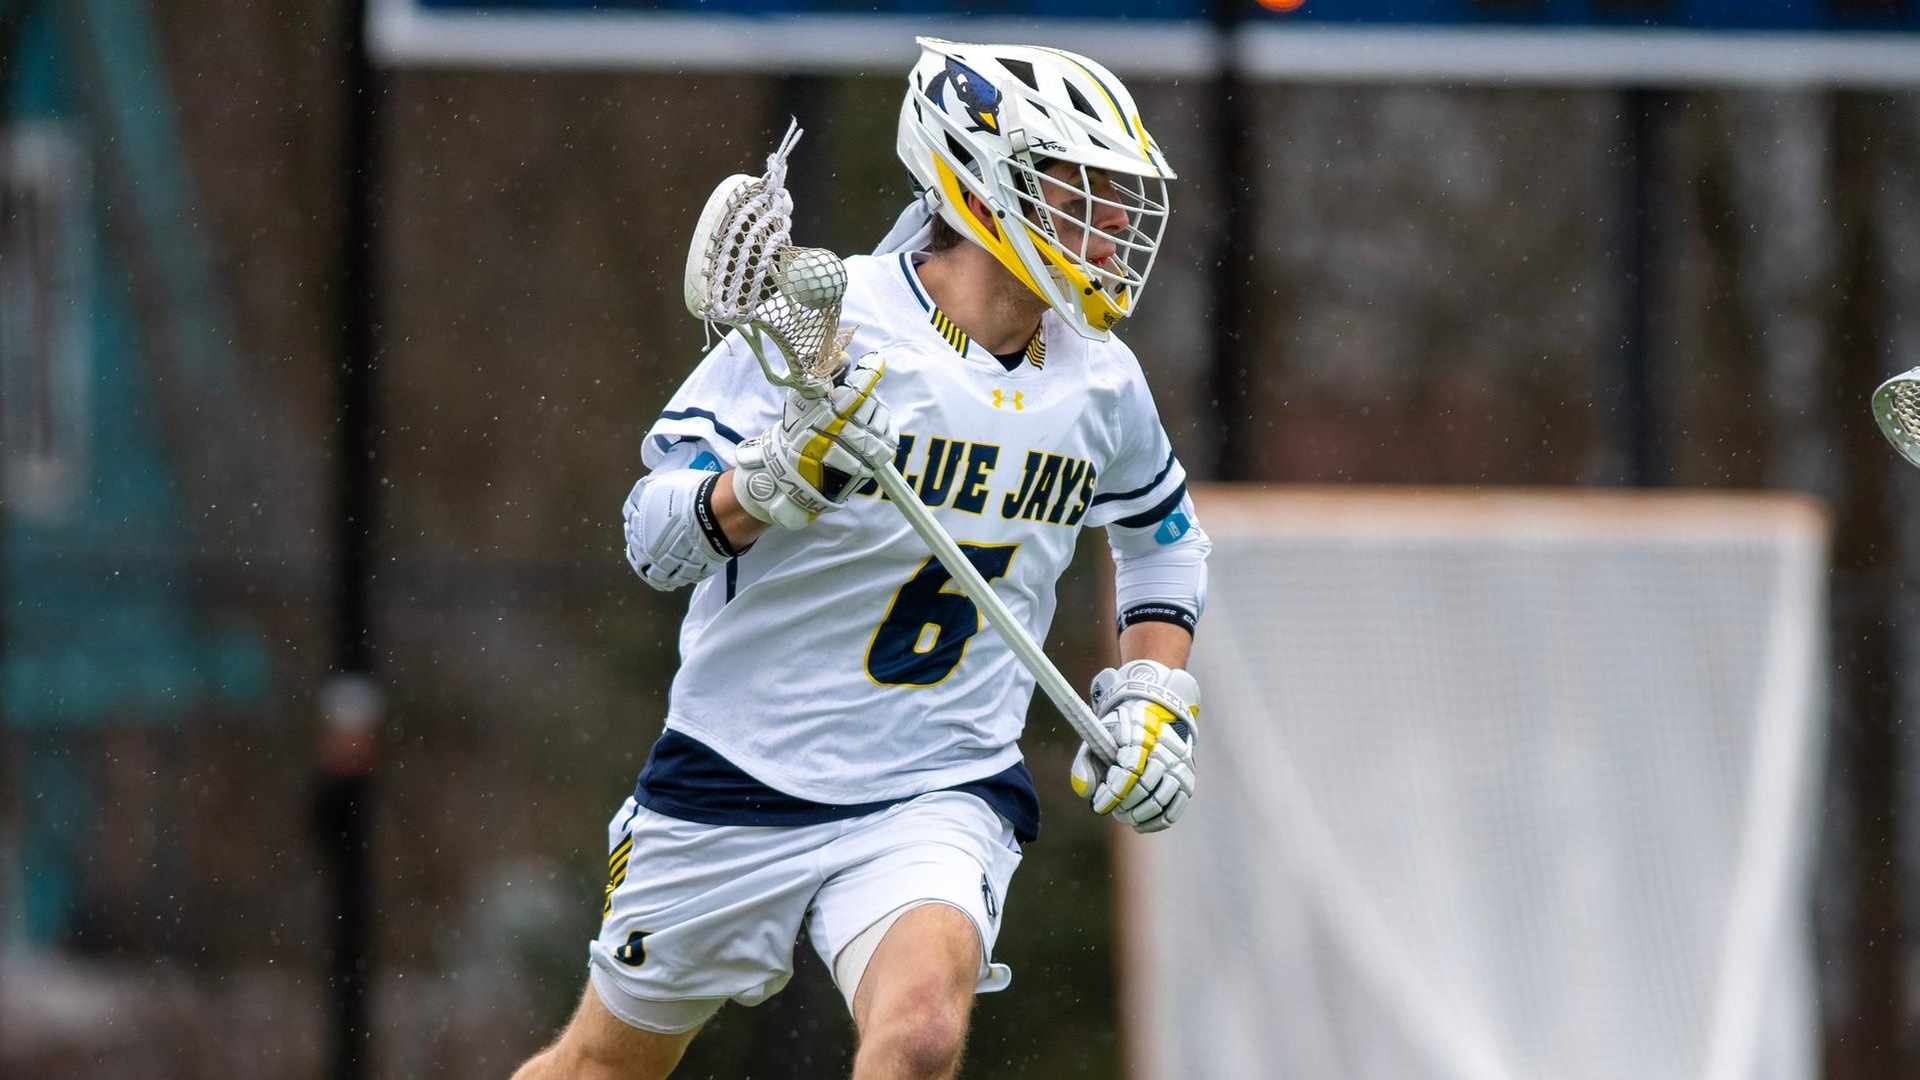 Men's Lacrosse Defeats Norwich on the Road Saturday, Secures Spot in GNAC Playoffs